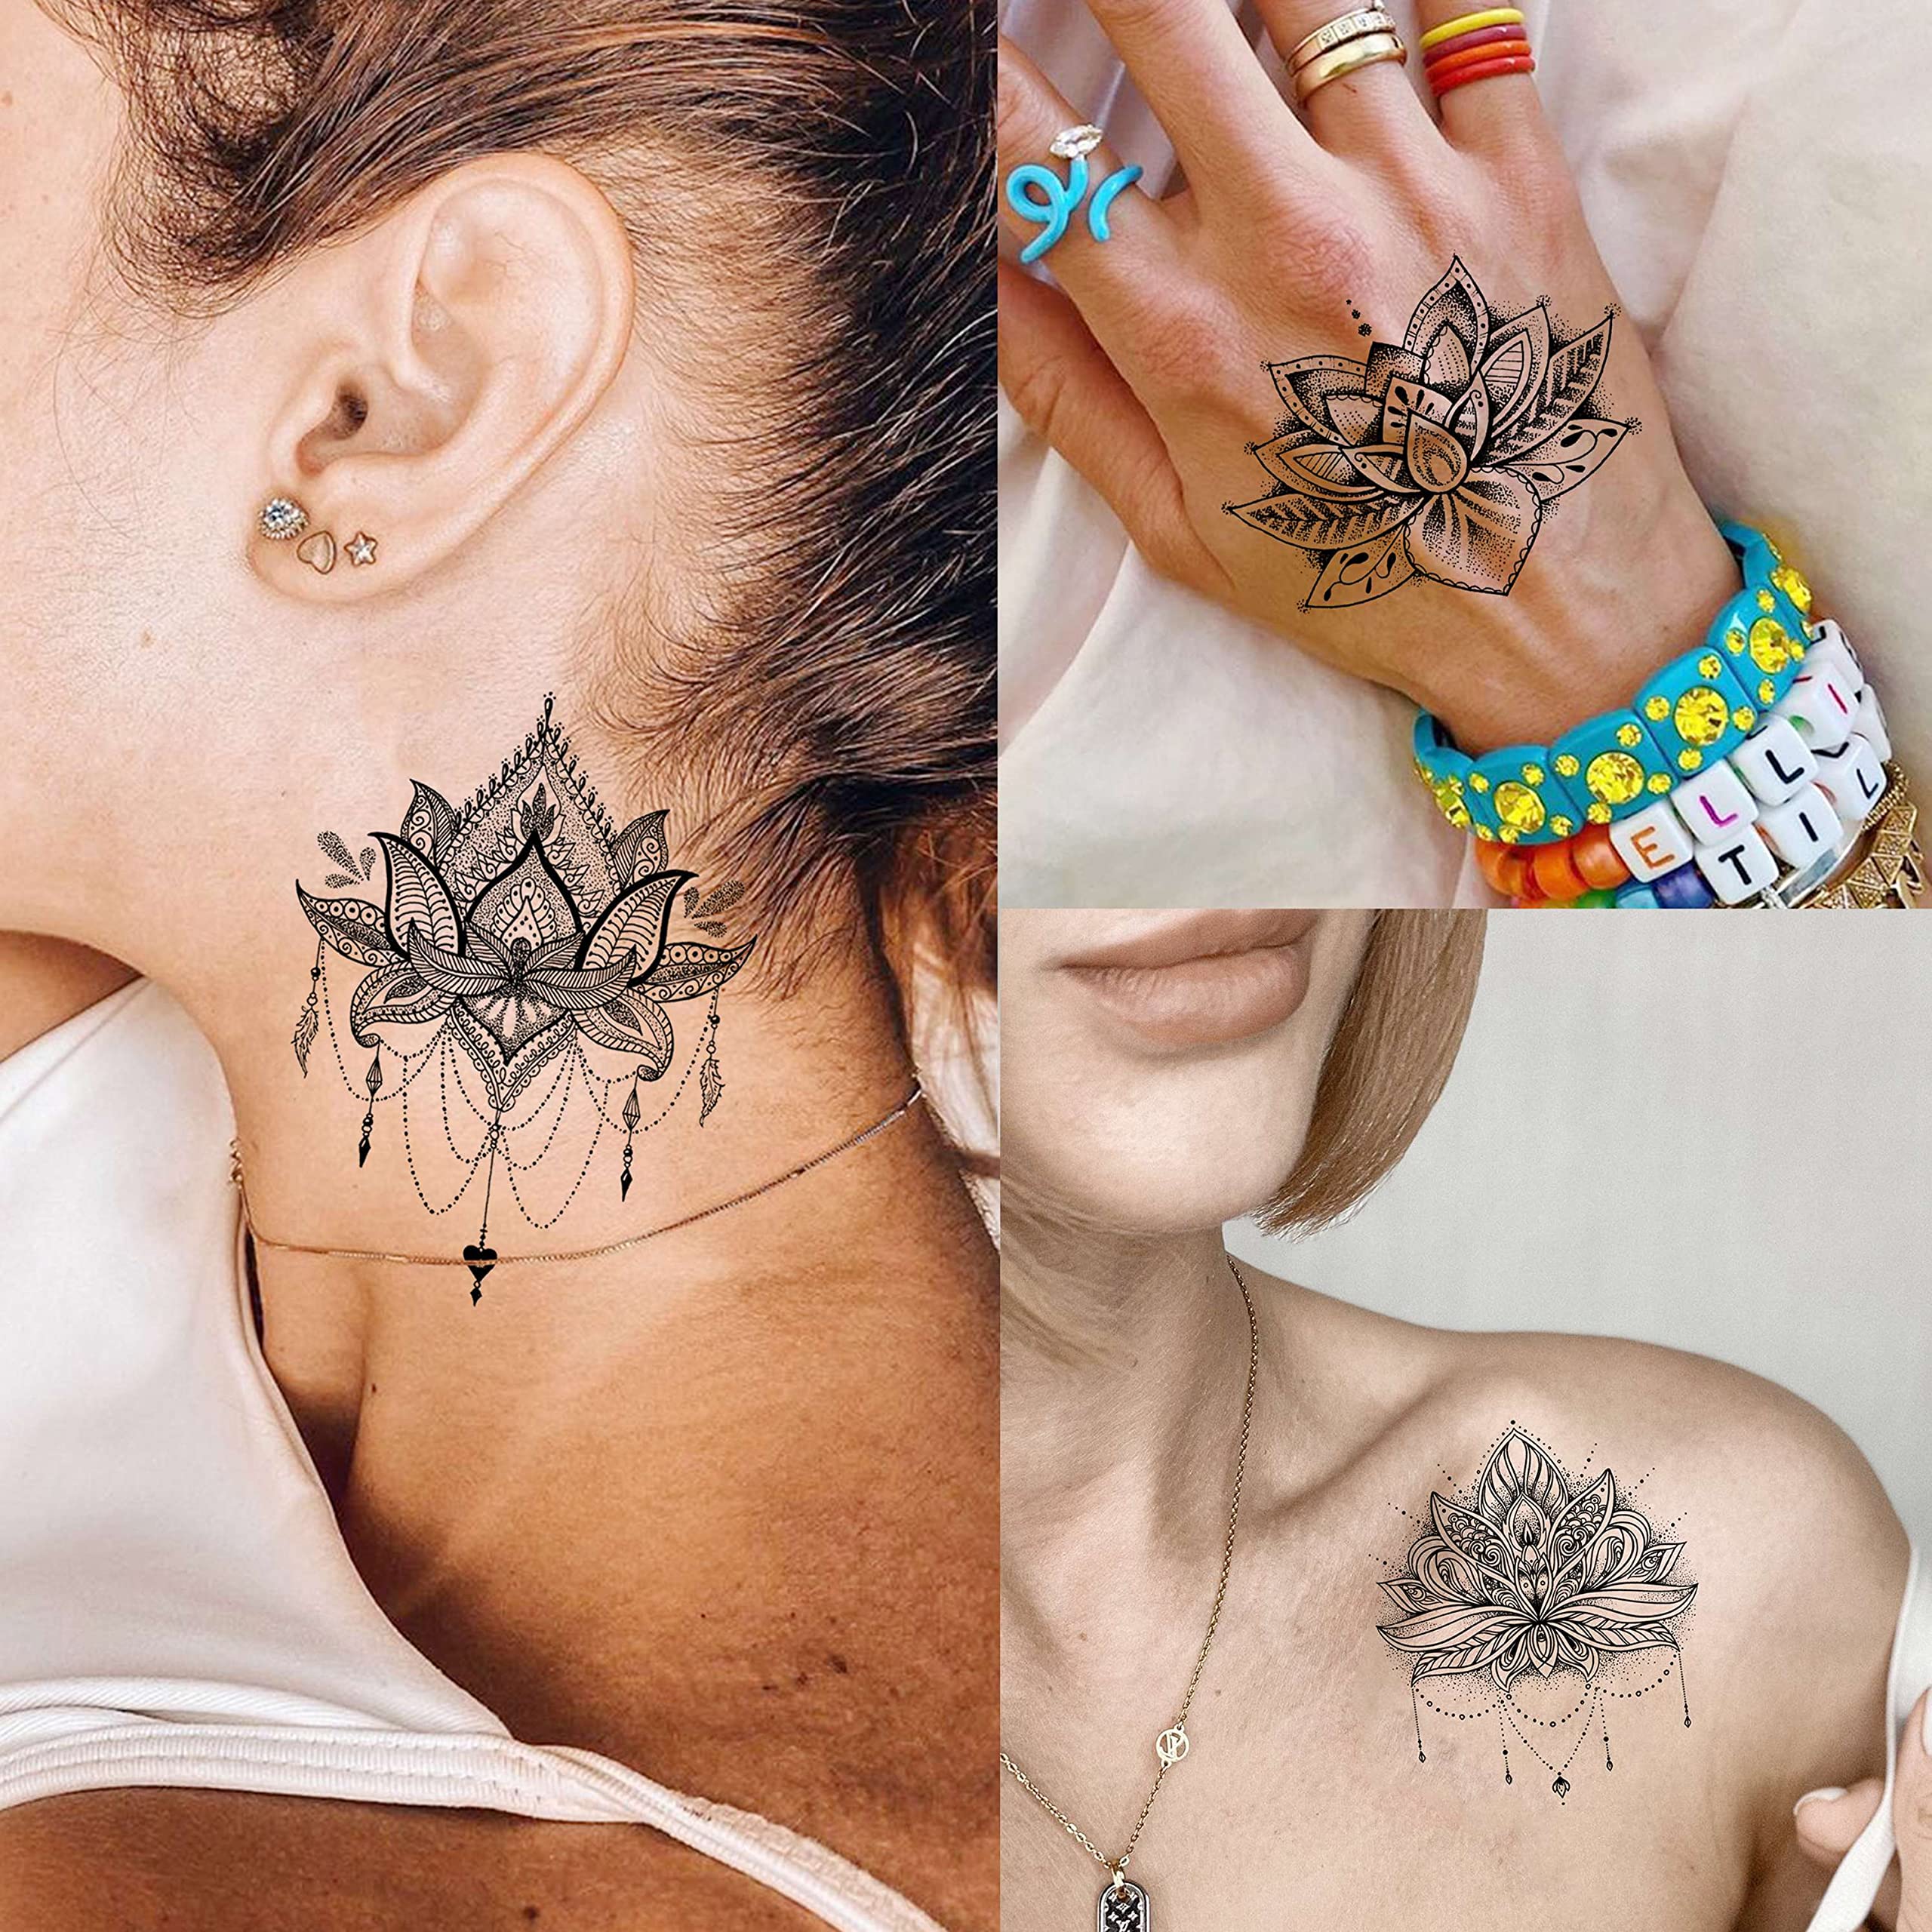 EGMBGM 15 Sheets Sexy Black Lotus Temporary Tattoos For Women Wedding Brides, Tribal Fake Jewelry Pendant Lace Moon Moth Flowers Temp Tattoos Temporary Sticker For Girls Arm Neck Hands Tatoos Jewels